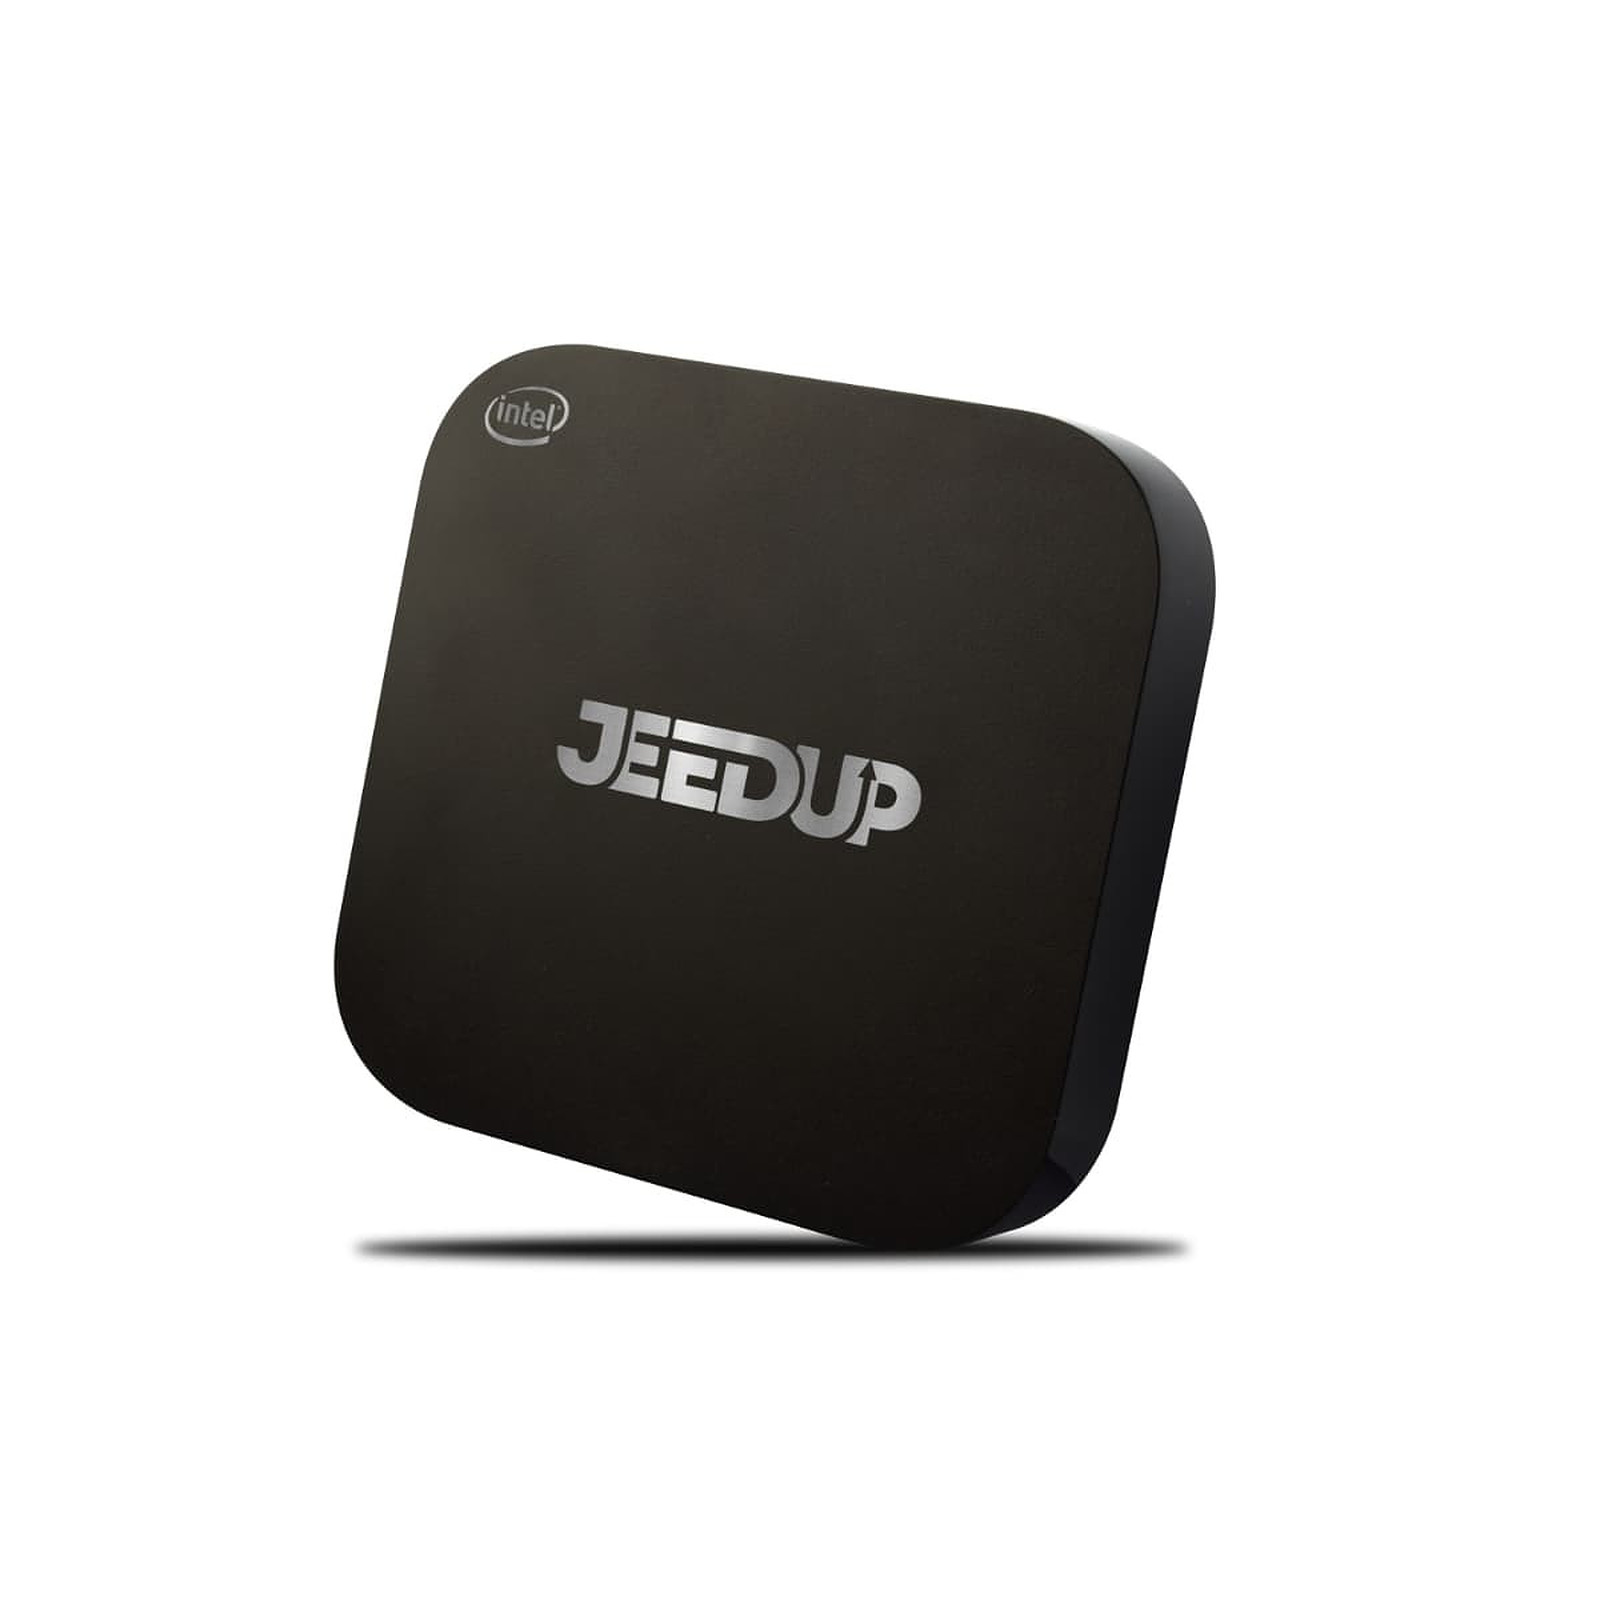 Wizelec Box Domotique Jeedup (powered By Jeedom) Version 2 JEEDUP_V2 - Box domotique Wizelec